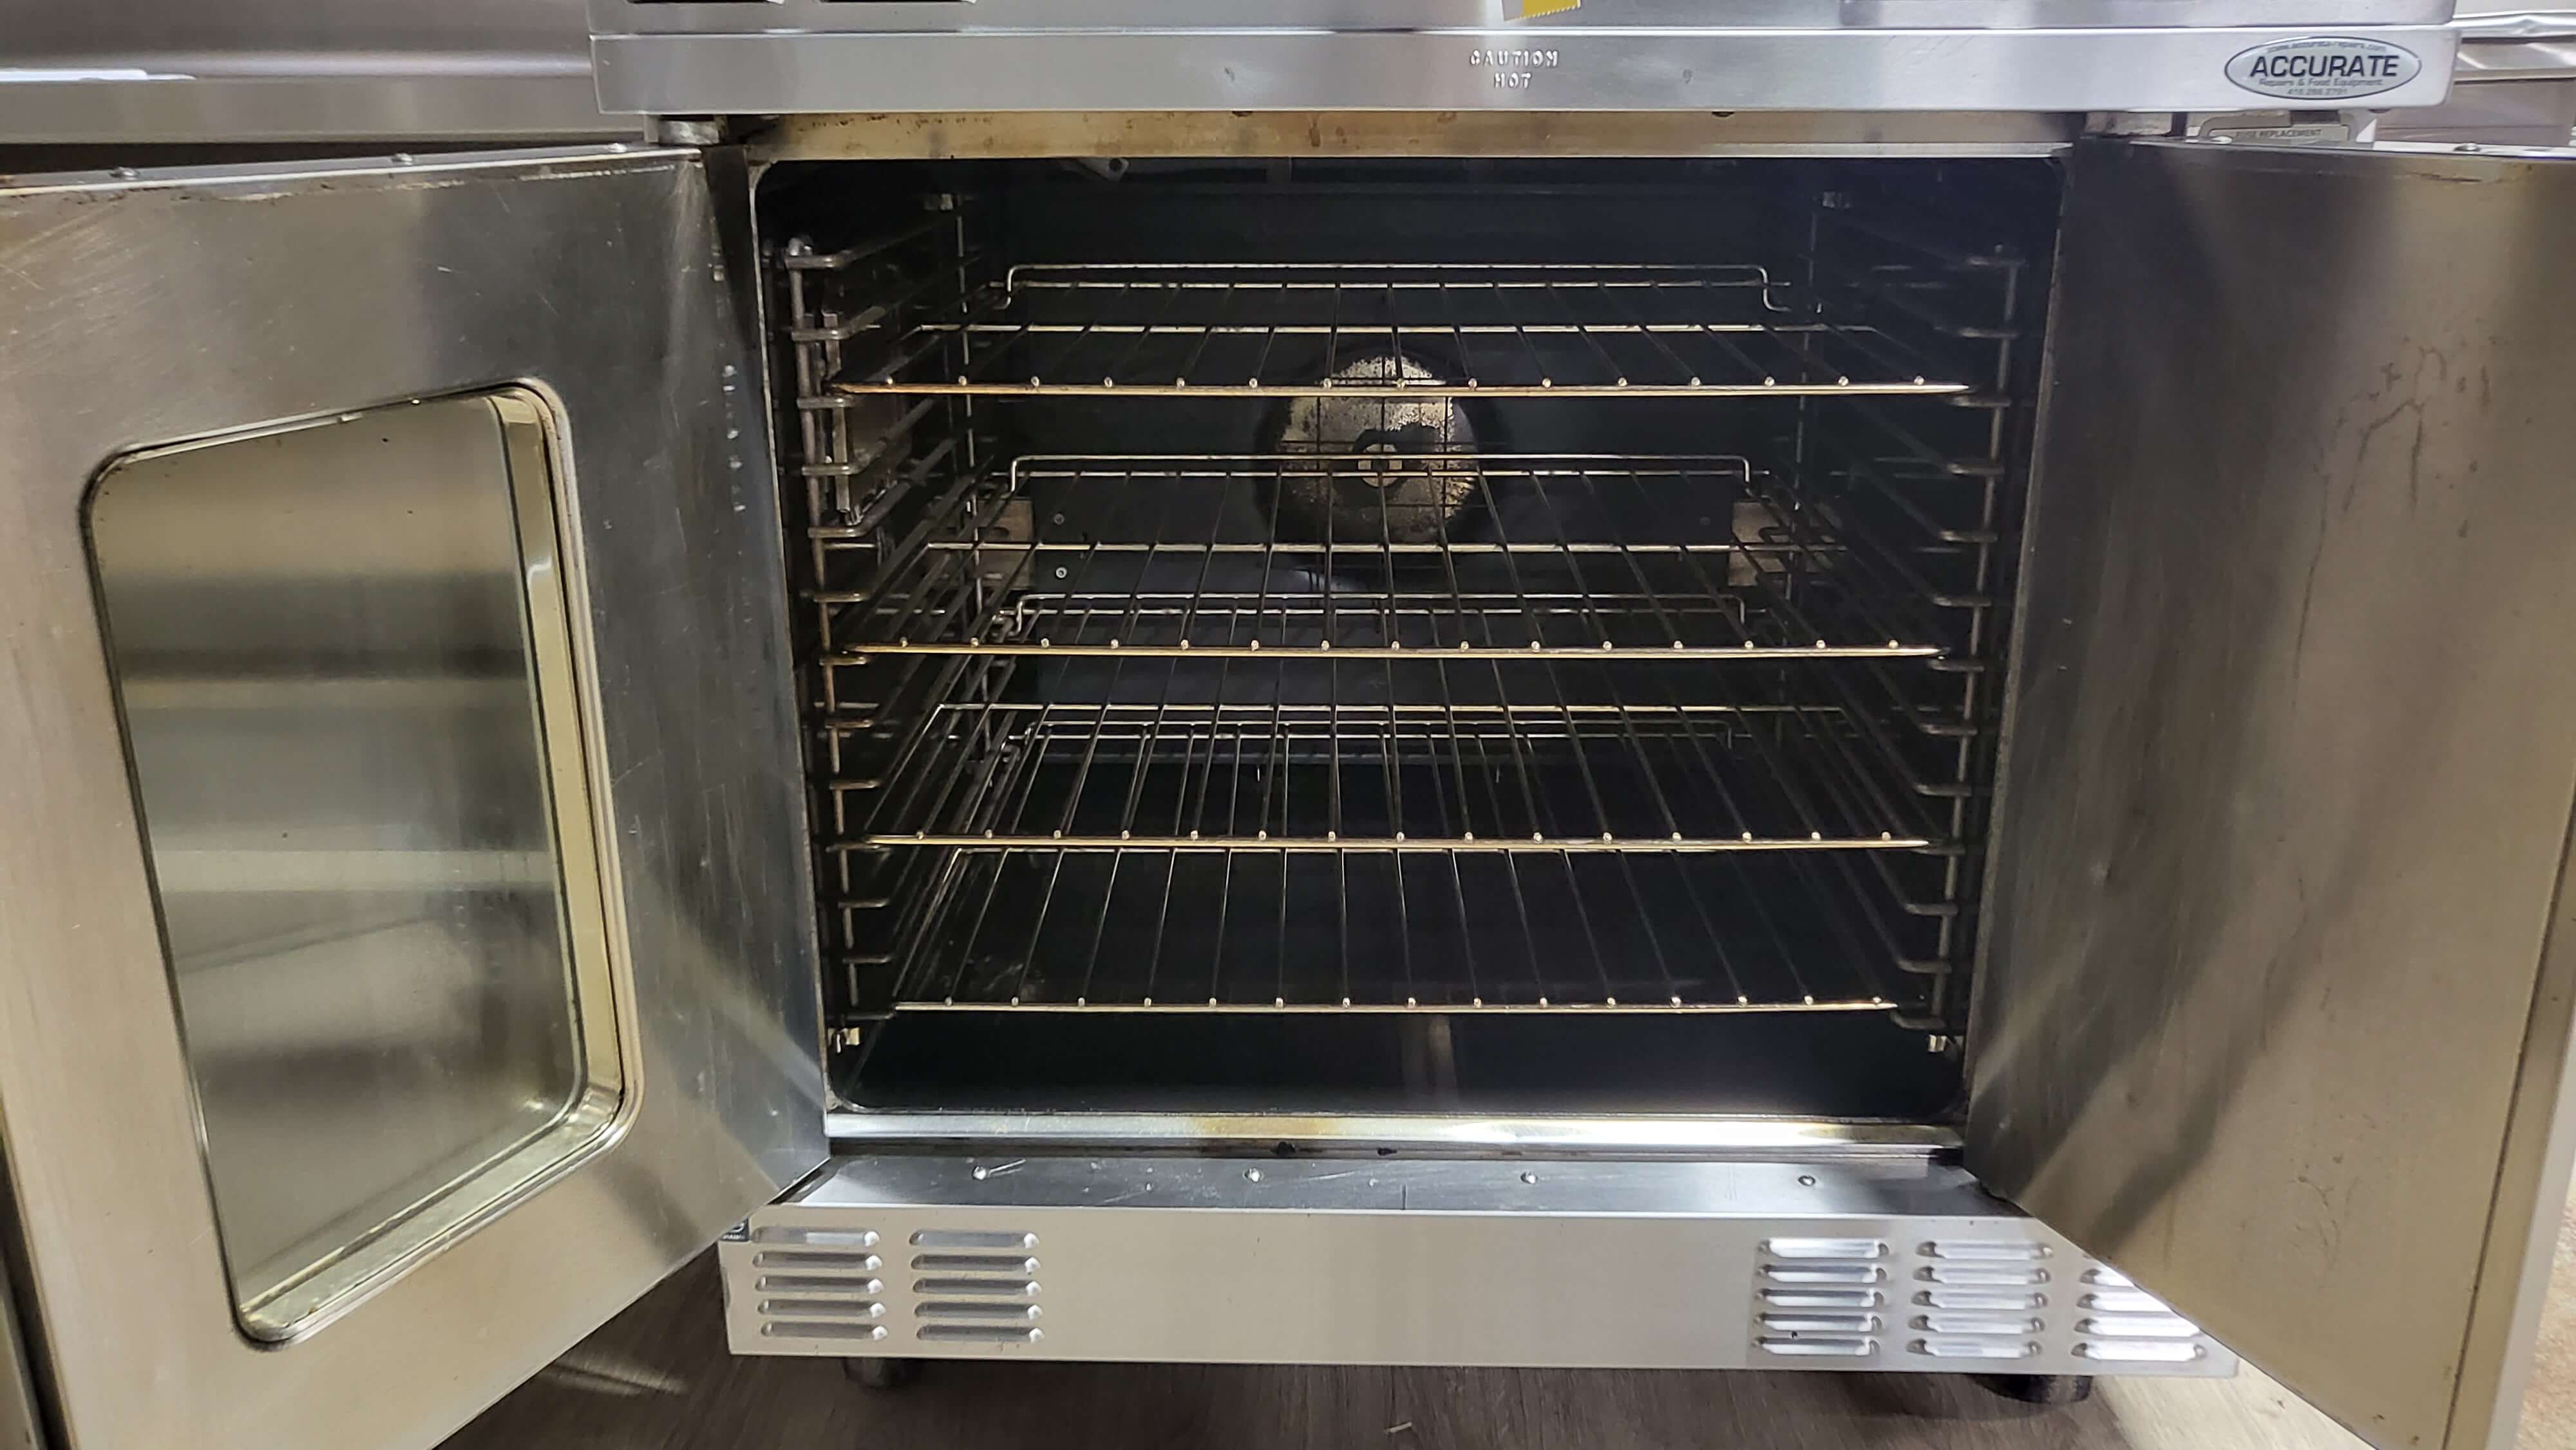 Thumbnail - Garland SUME-100 Double Convection Oven